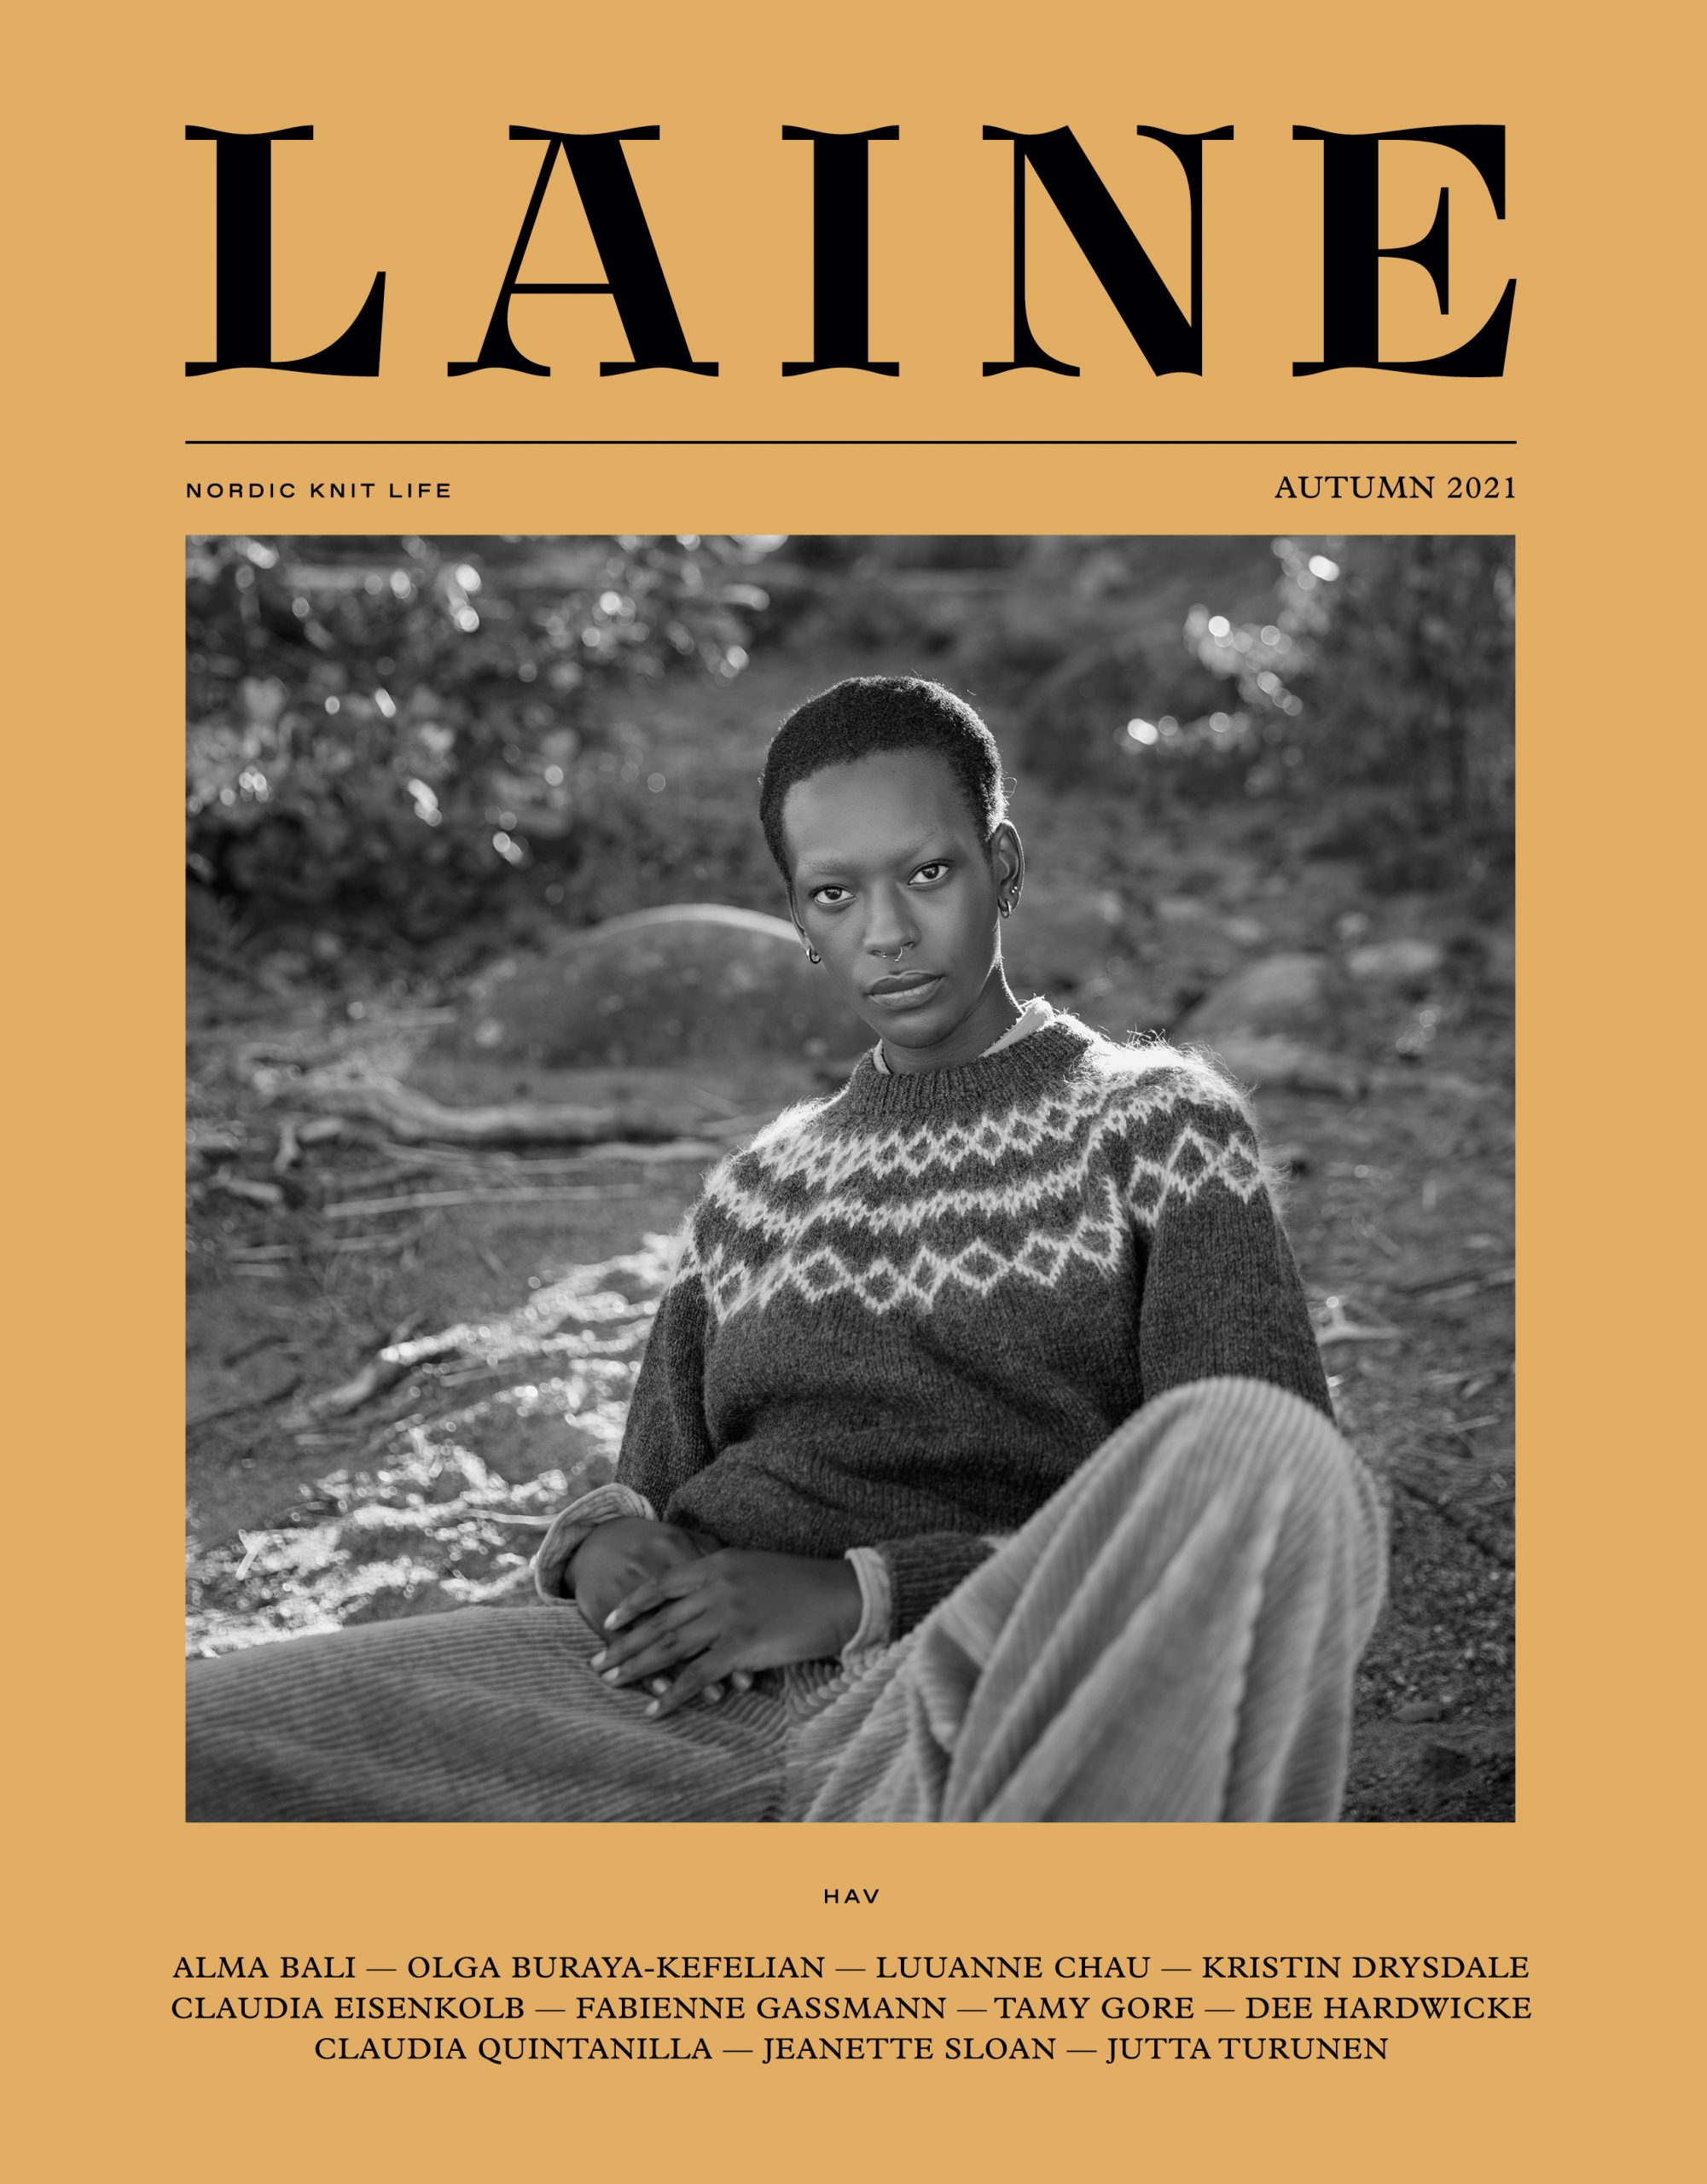 Previewing the new issue of Laine Magazine